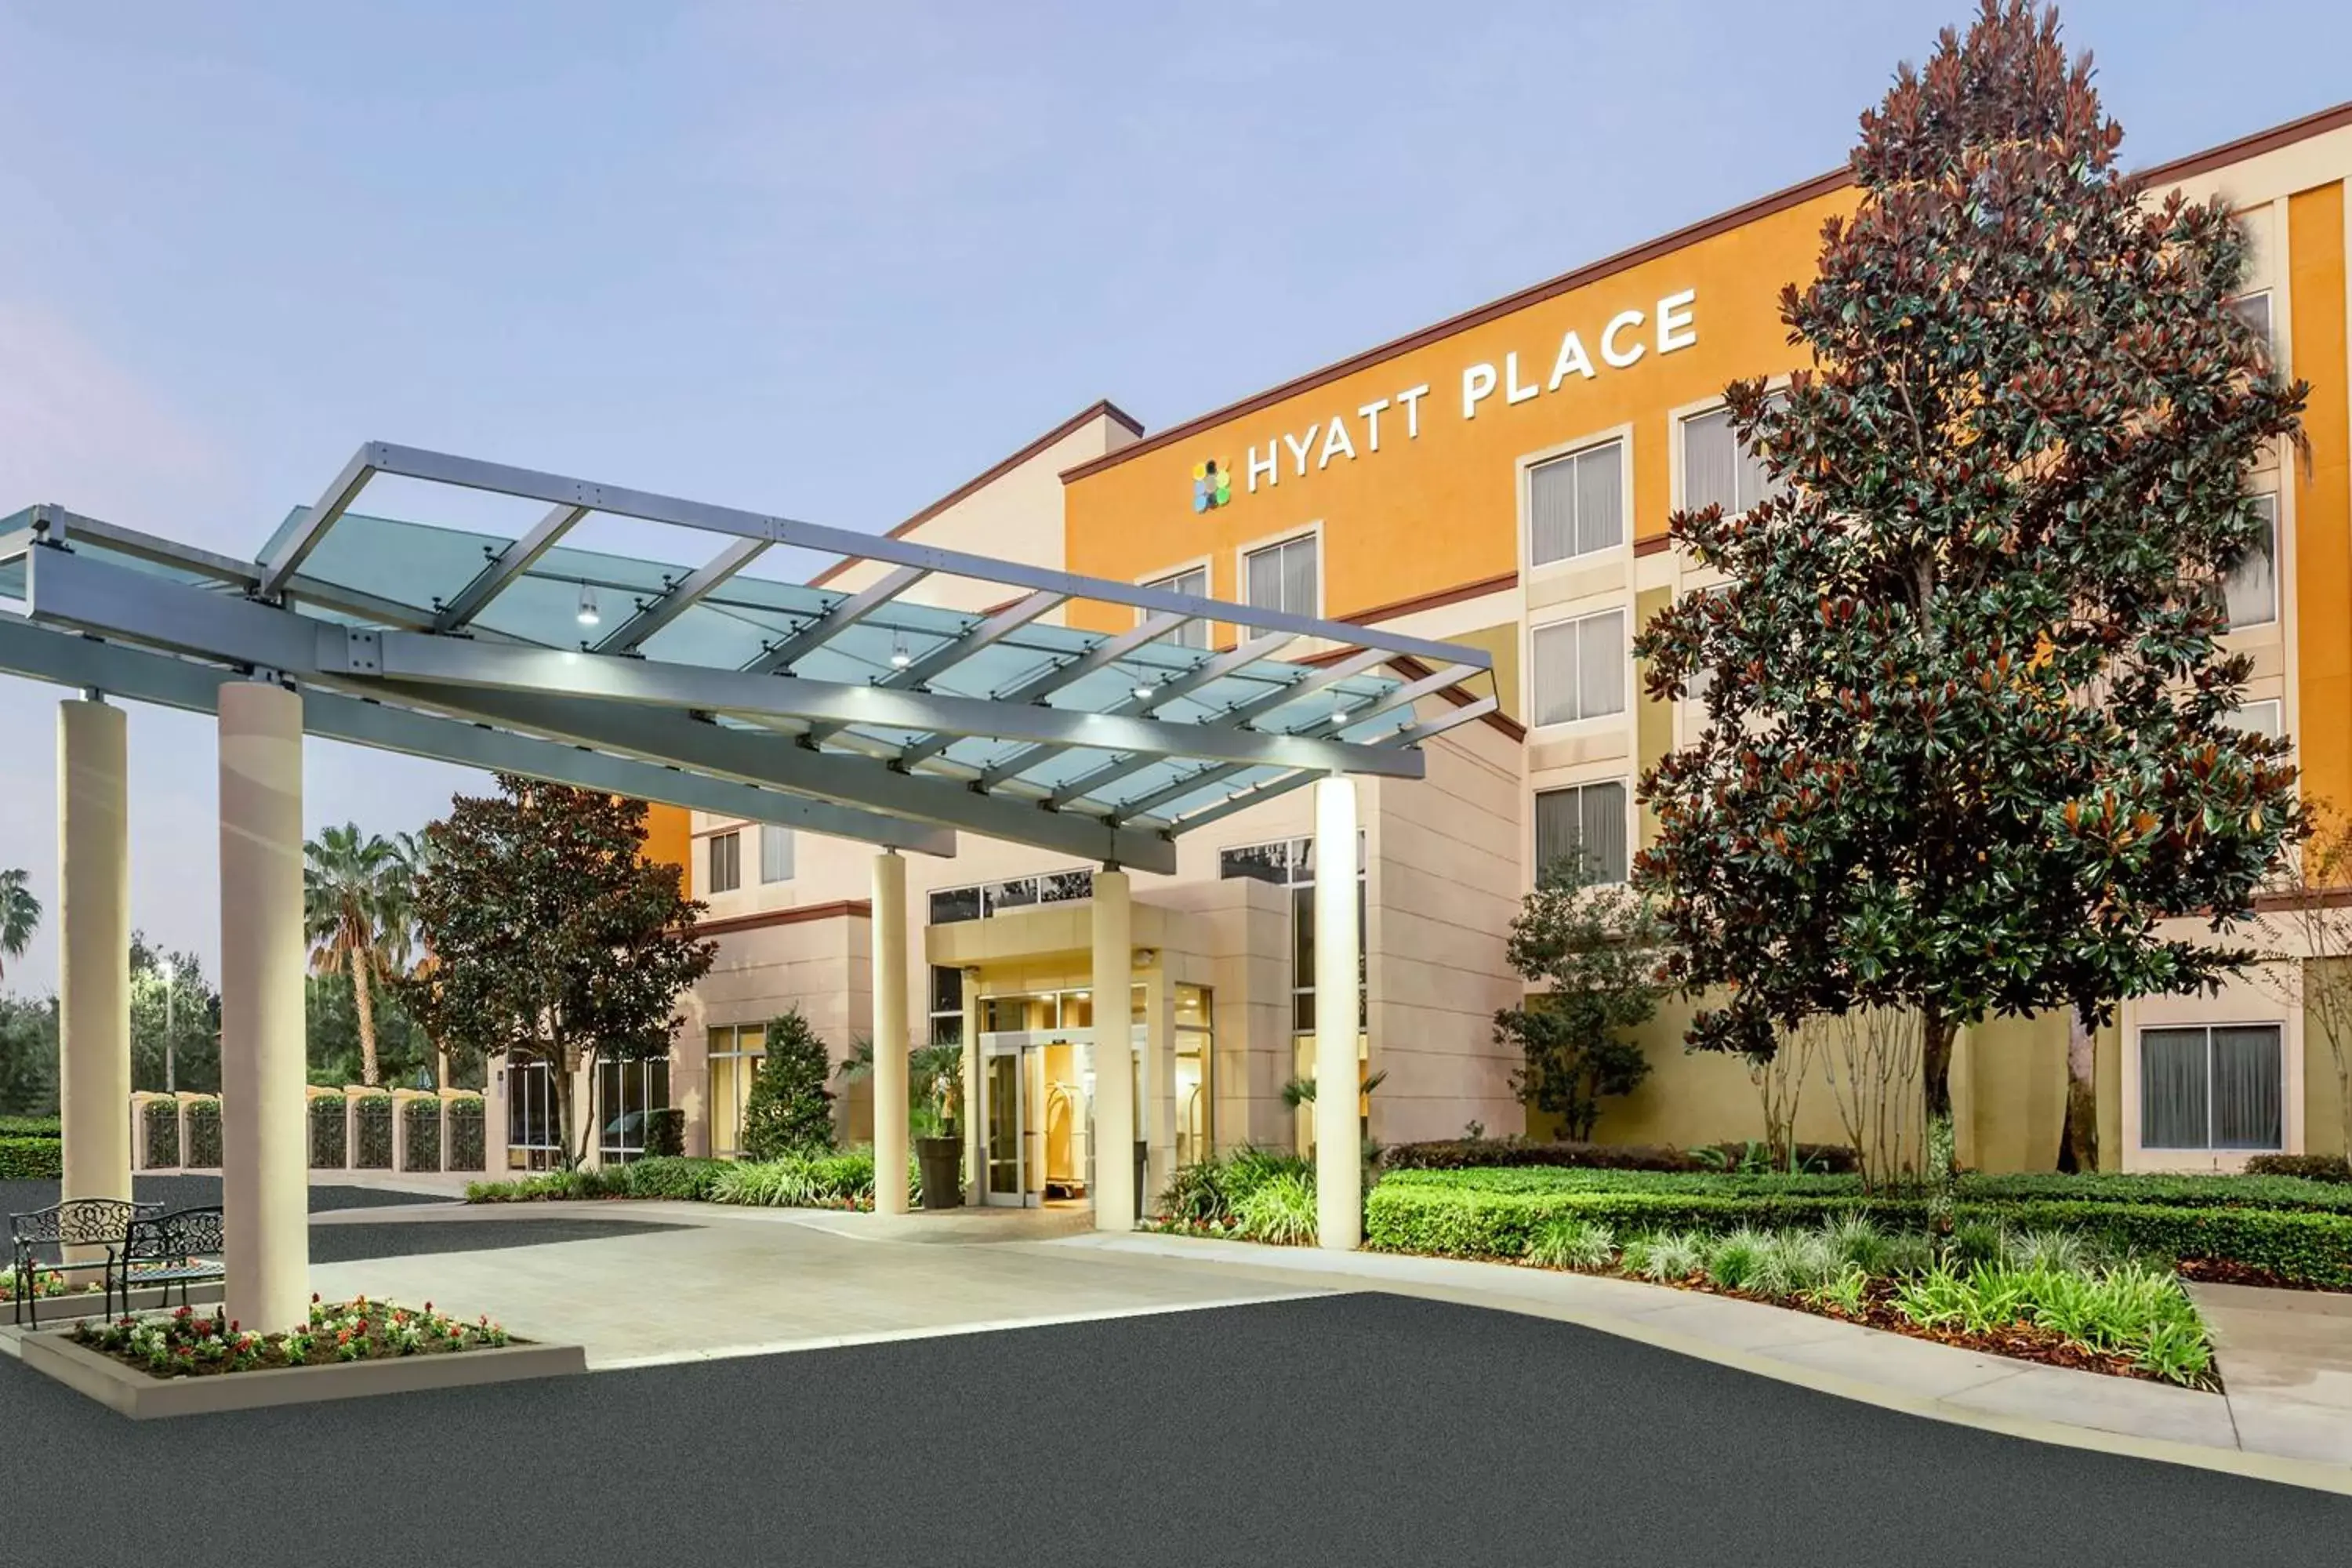 Property Building in Hyatt Place Lake Mary/Orlando North